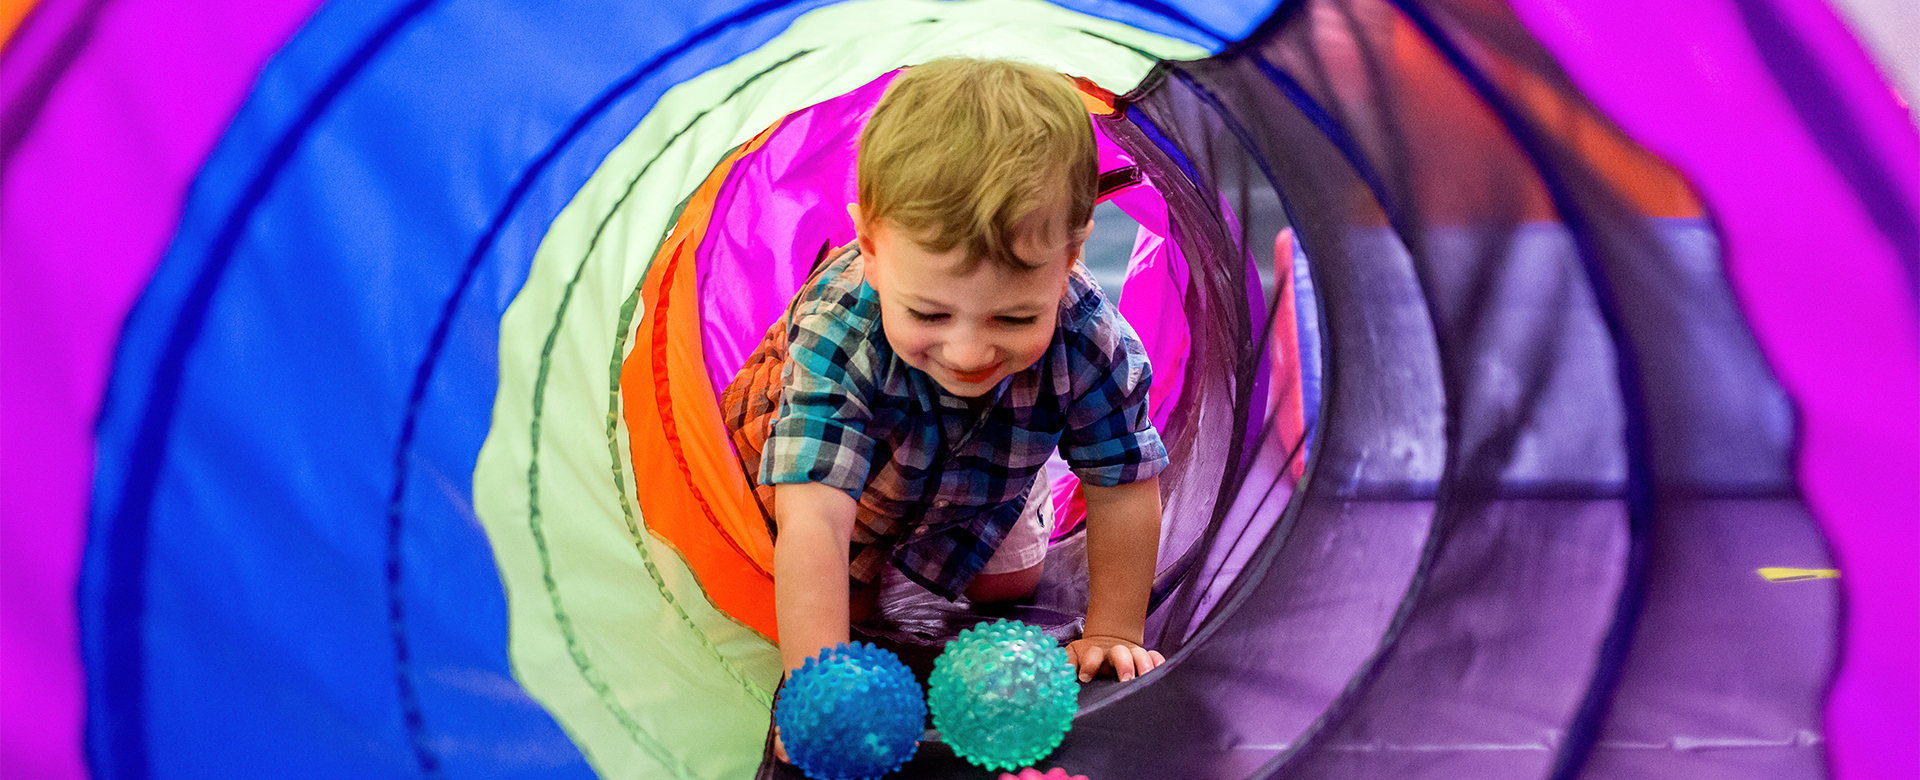 child-crawling-through-colorful-tunnel-full-width